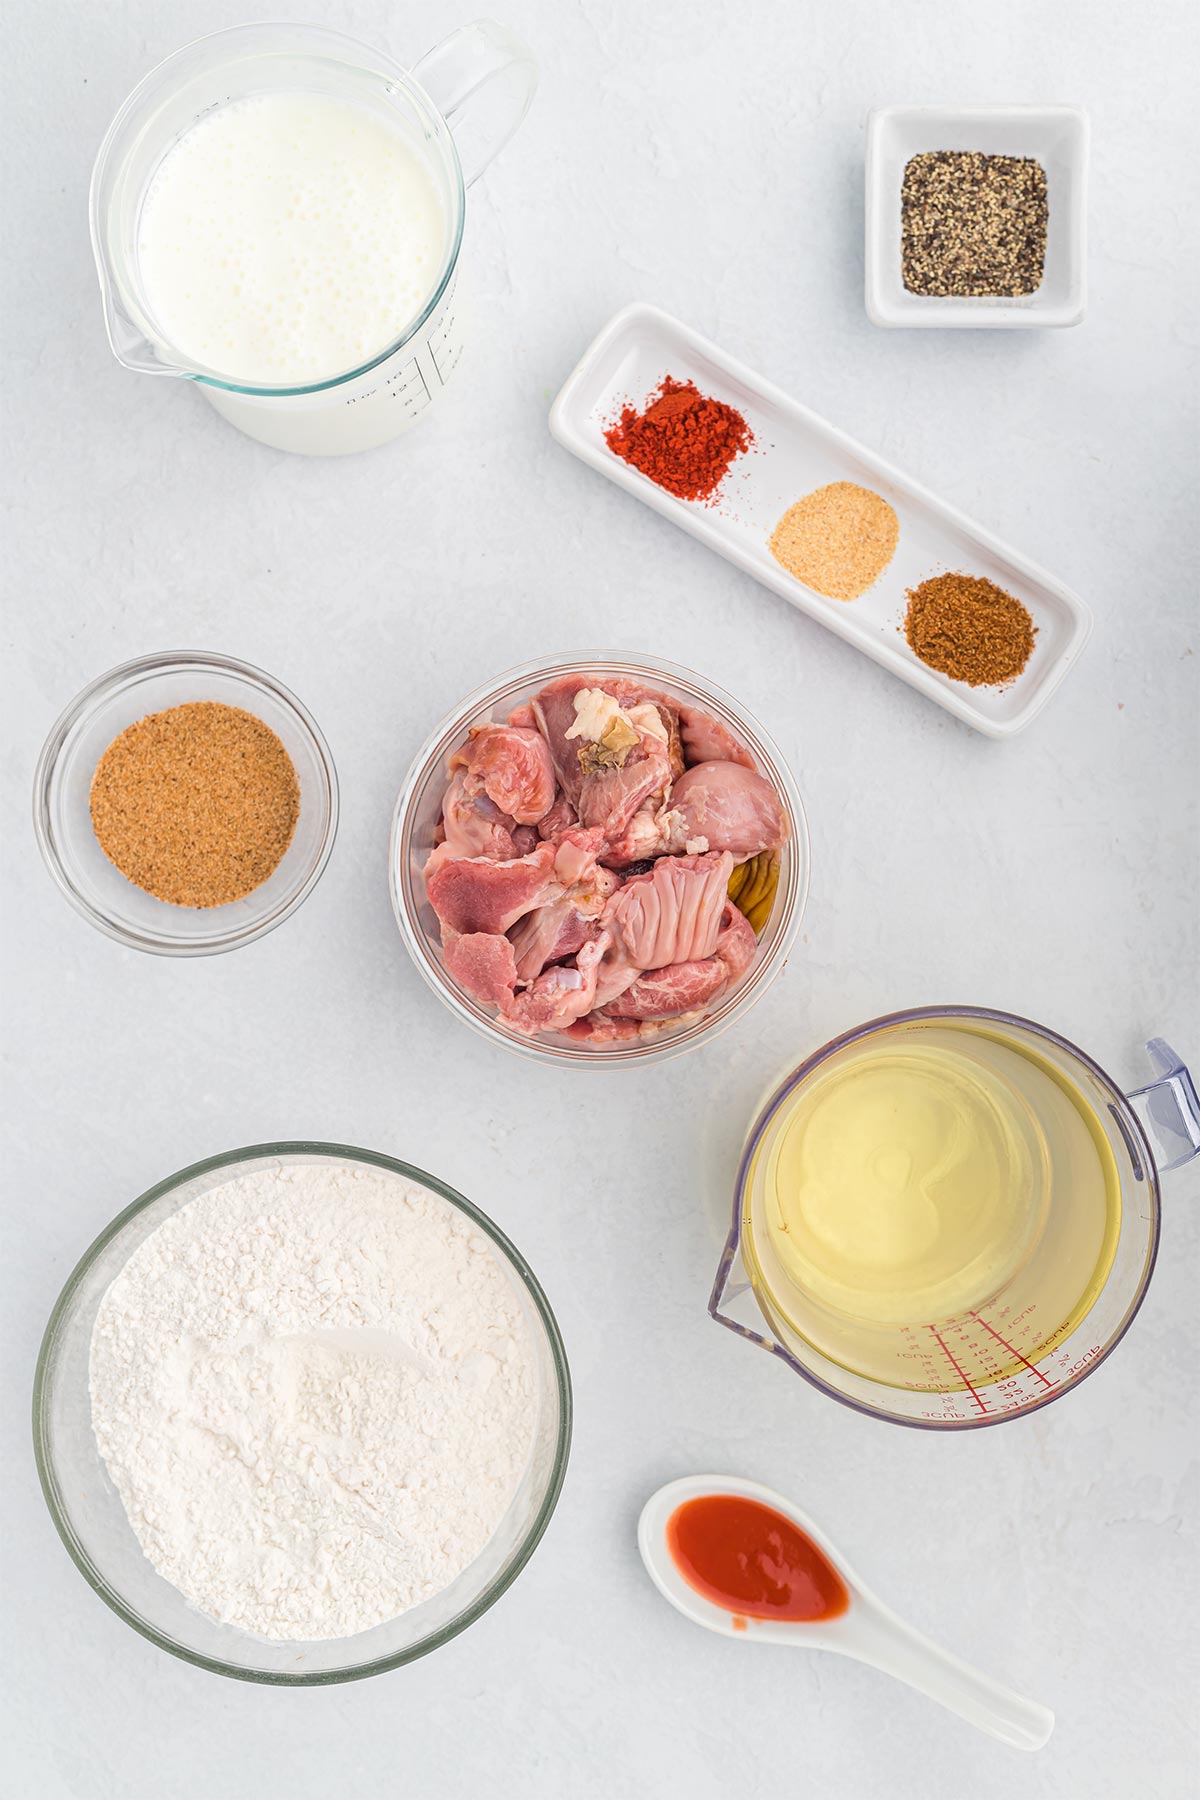 Ingredients to make southern fried chicken gizzards on the table.